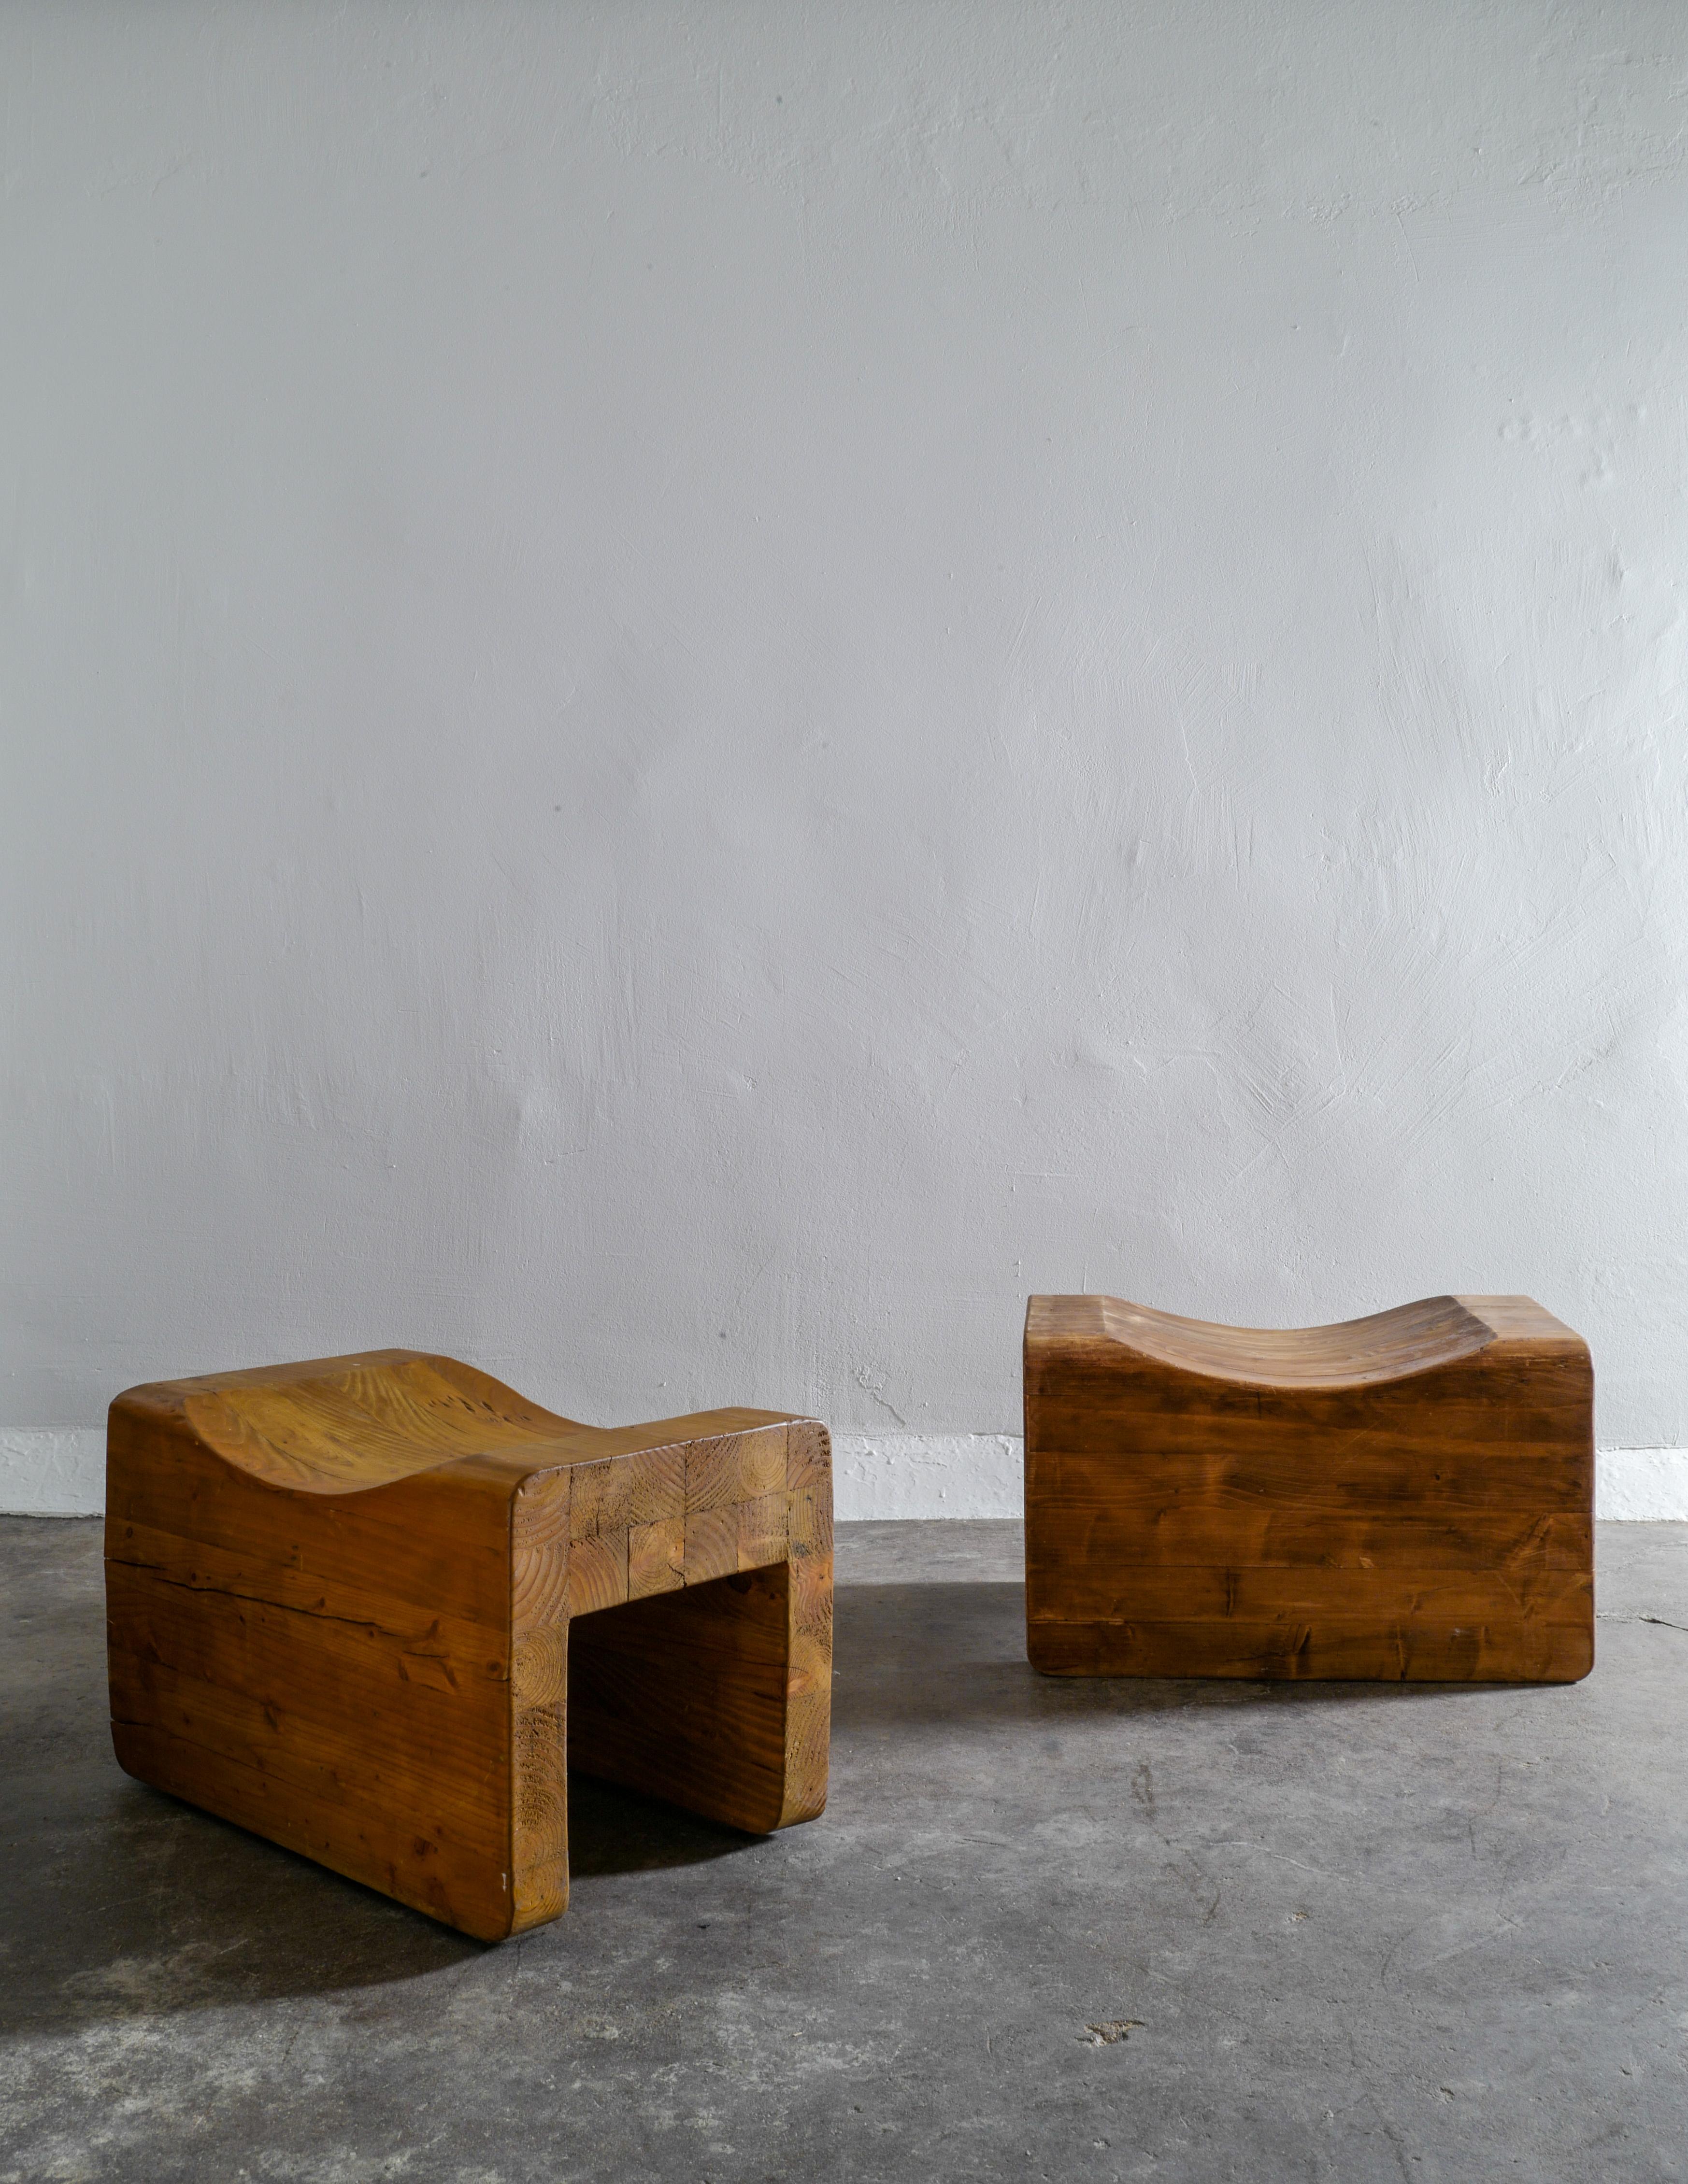 Rare pair of stools in solid pine by K. J. Pettersson & Söner from the 1970s. In good vintage condition with showing some signs of use and nice patina.